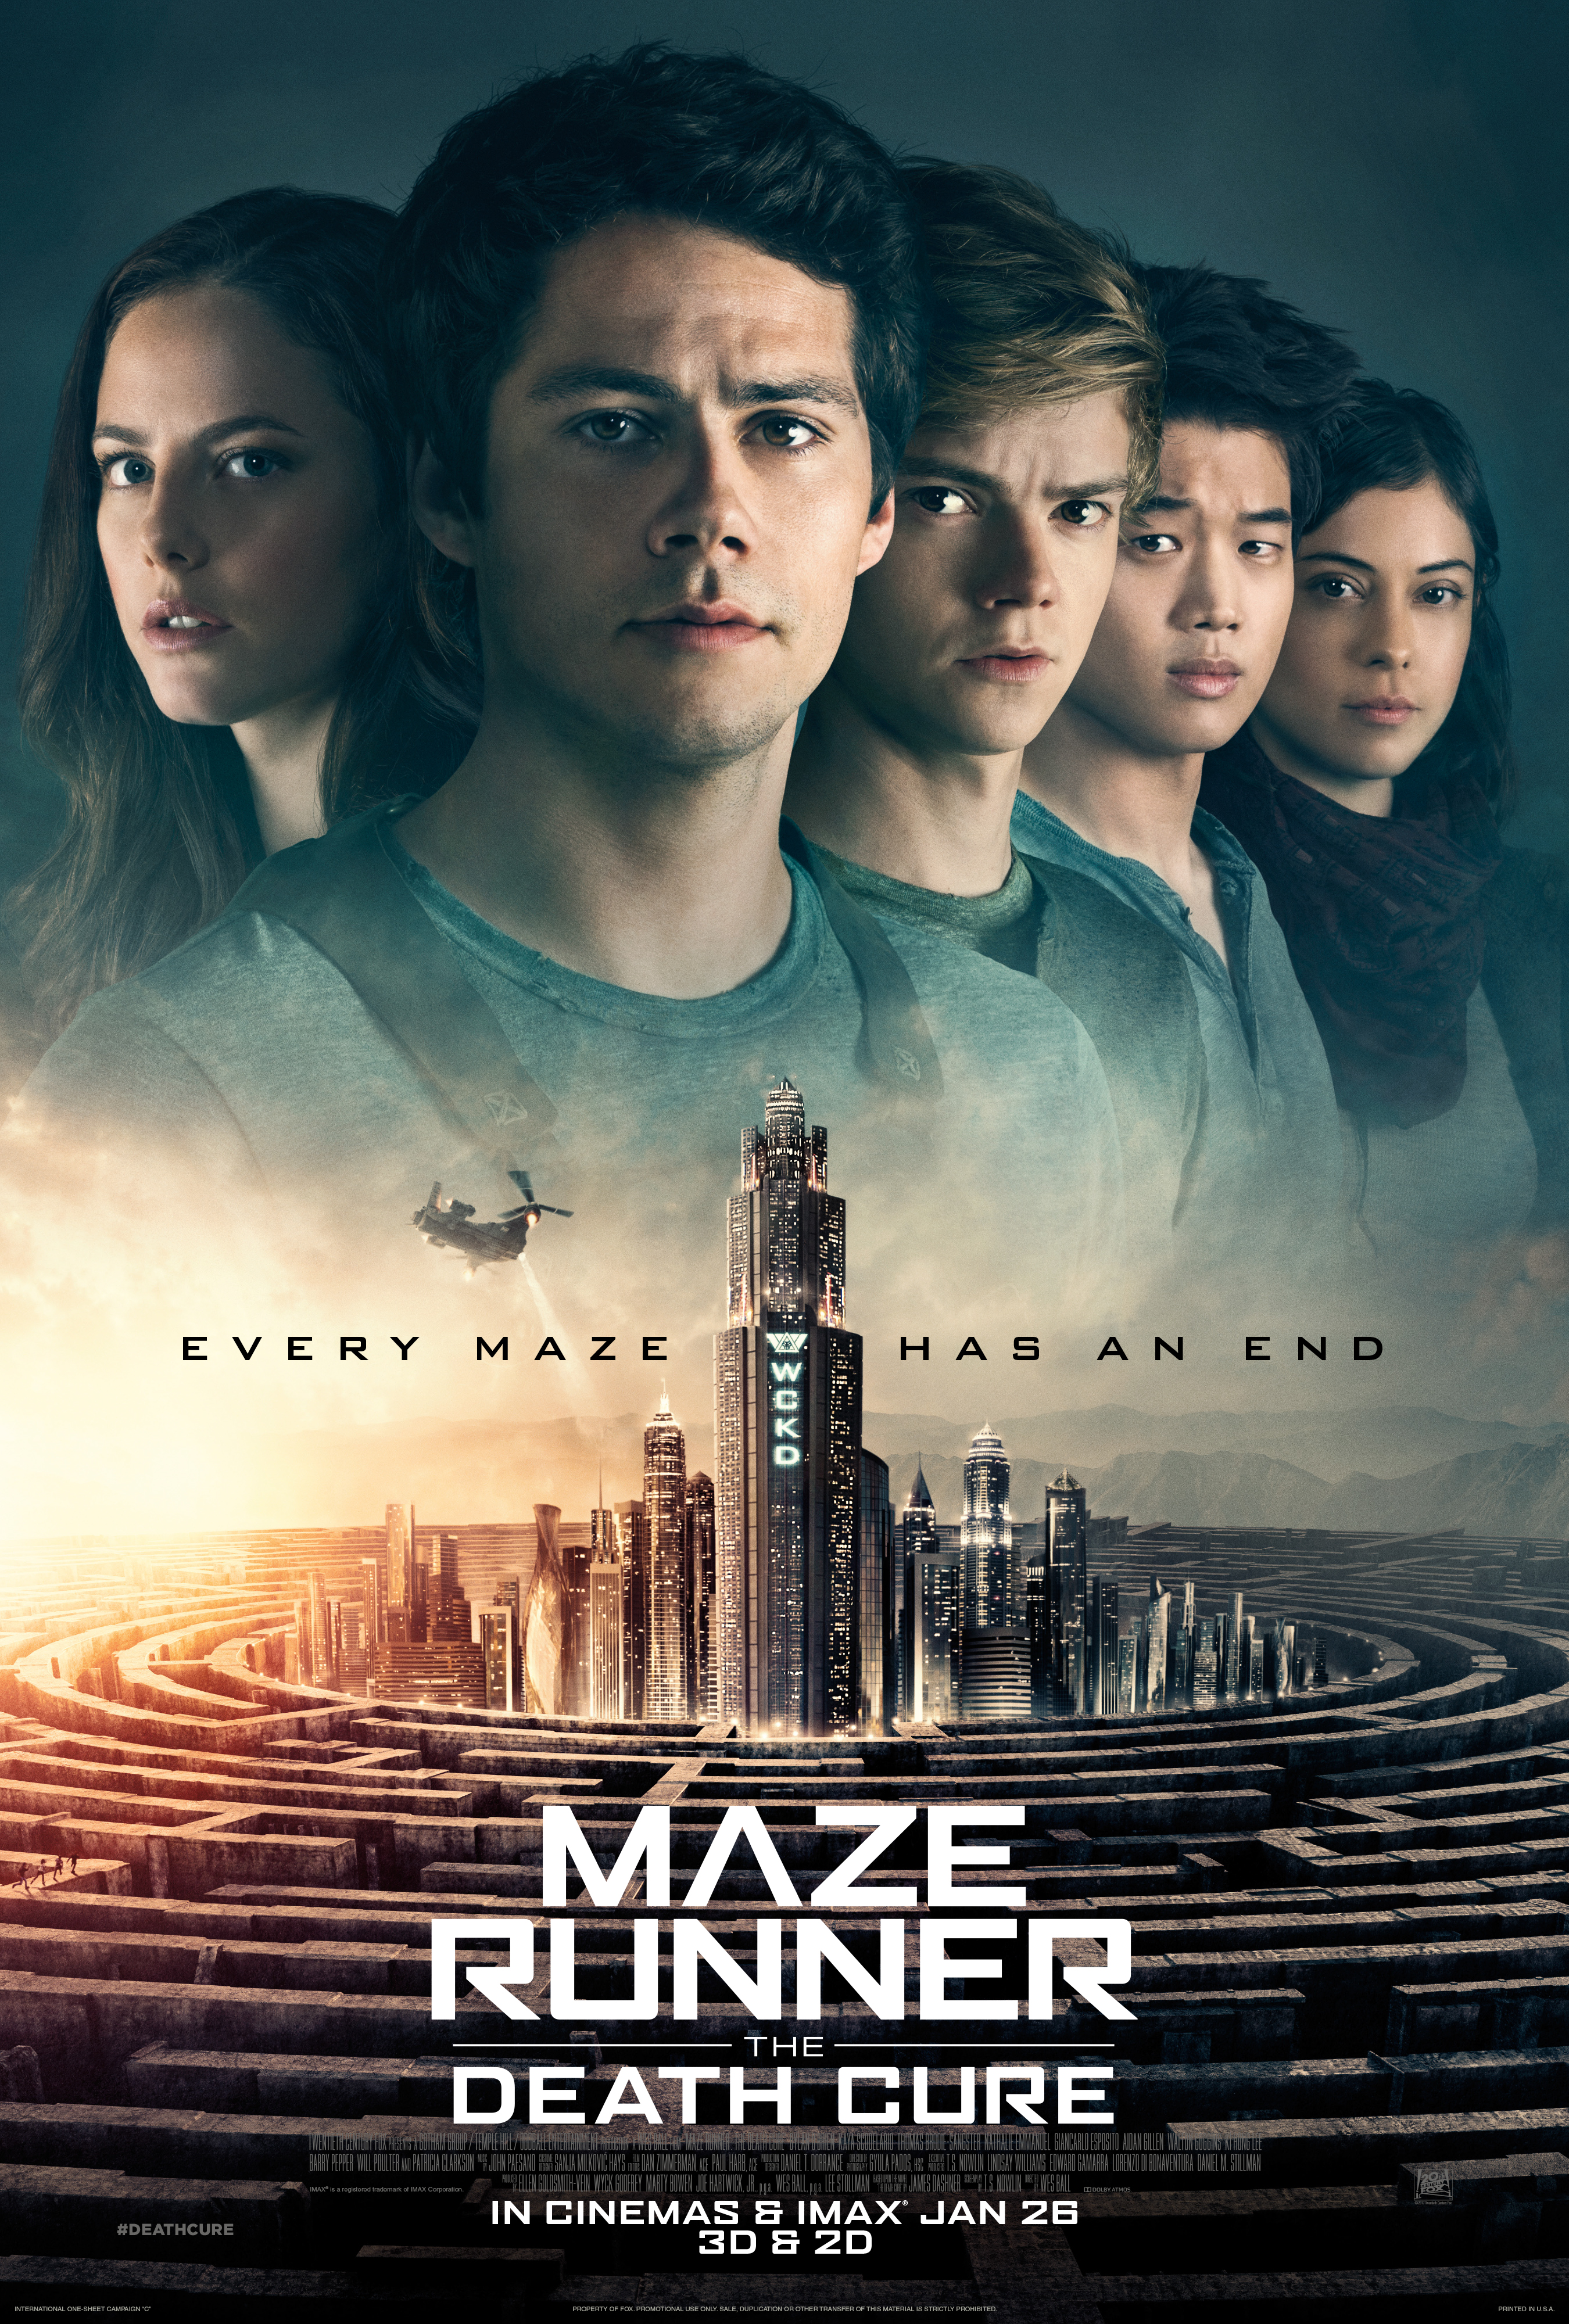 Maze Runner: The Death Cure film review: does the YA franchise go out with a WCKD bang?